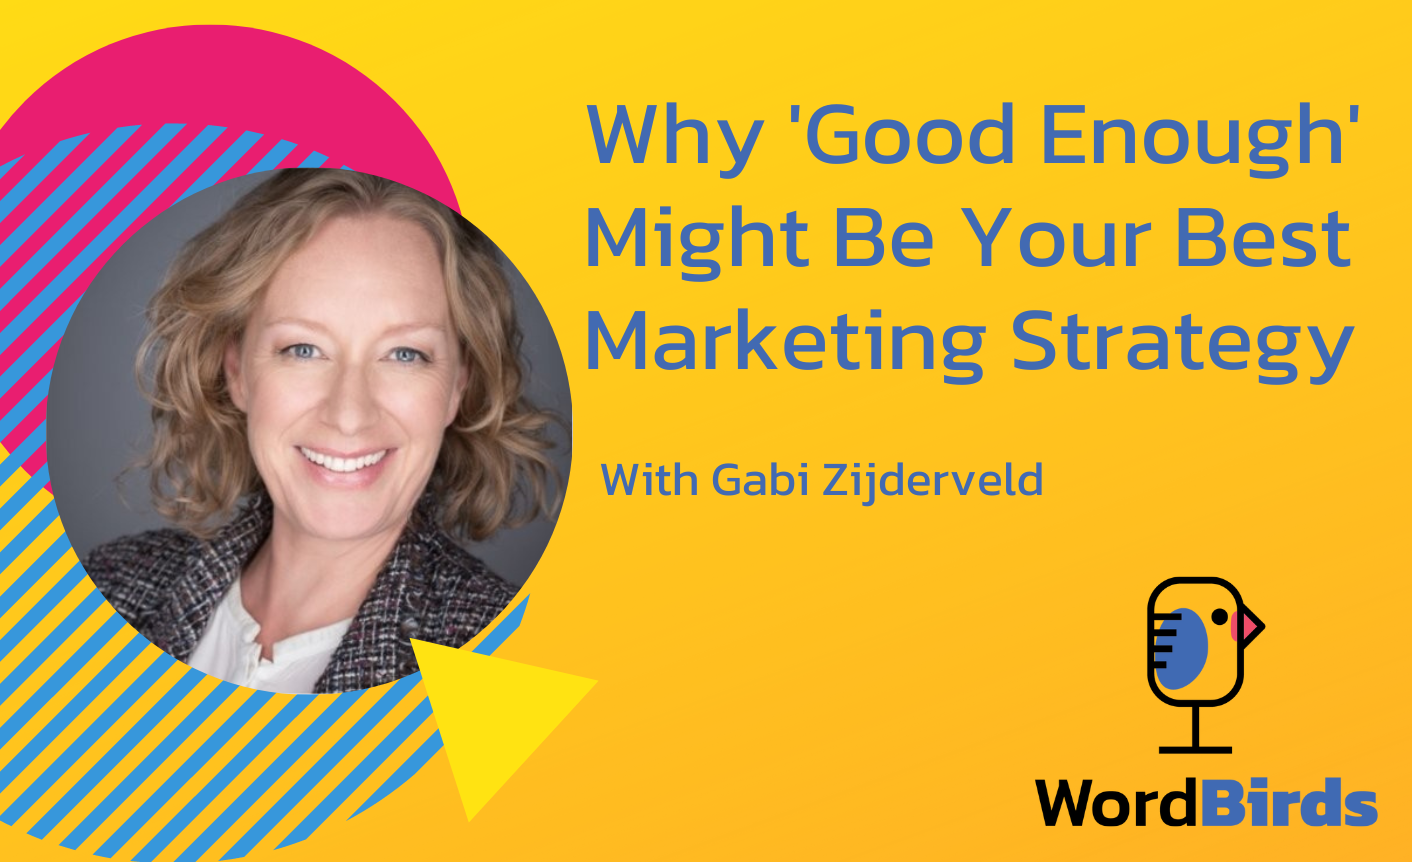 On a yellow background with a headshot of Gabi Zijderveld on the left, the title reads "Why 'Good Enough' Might Be Your Best Marketing Strategy."